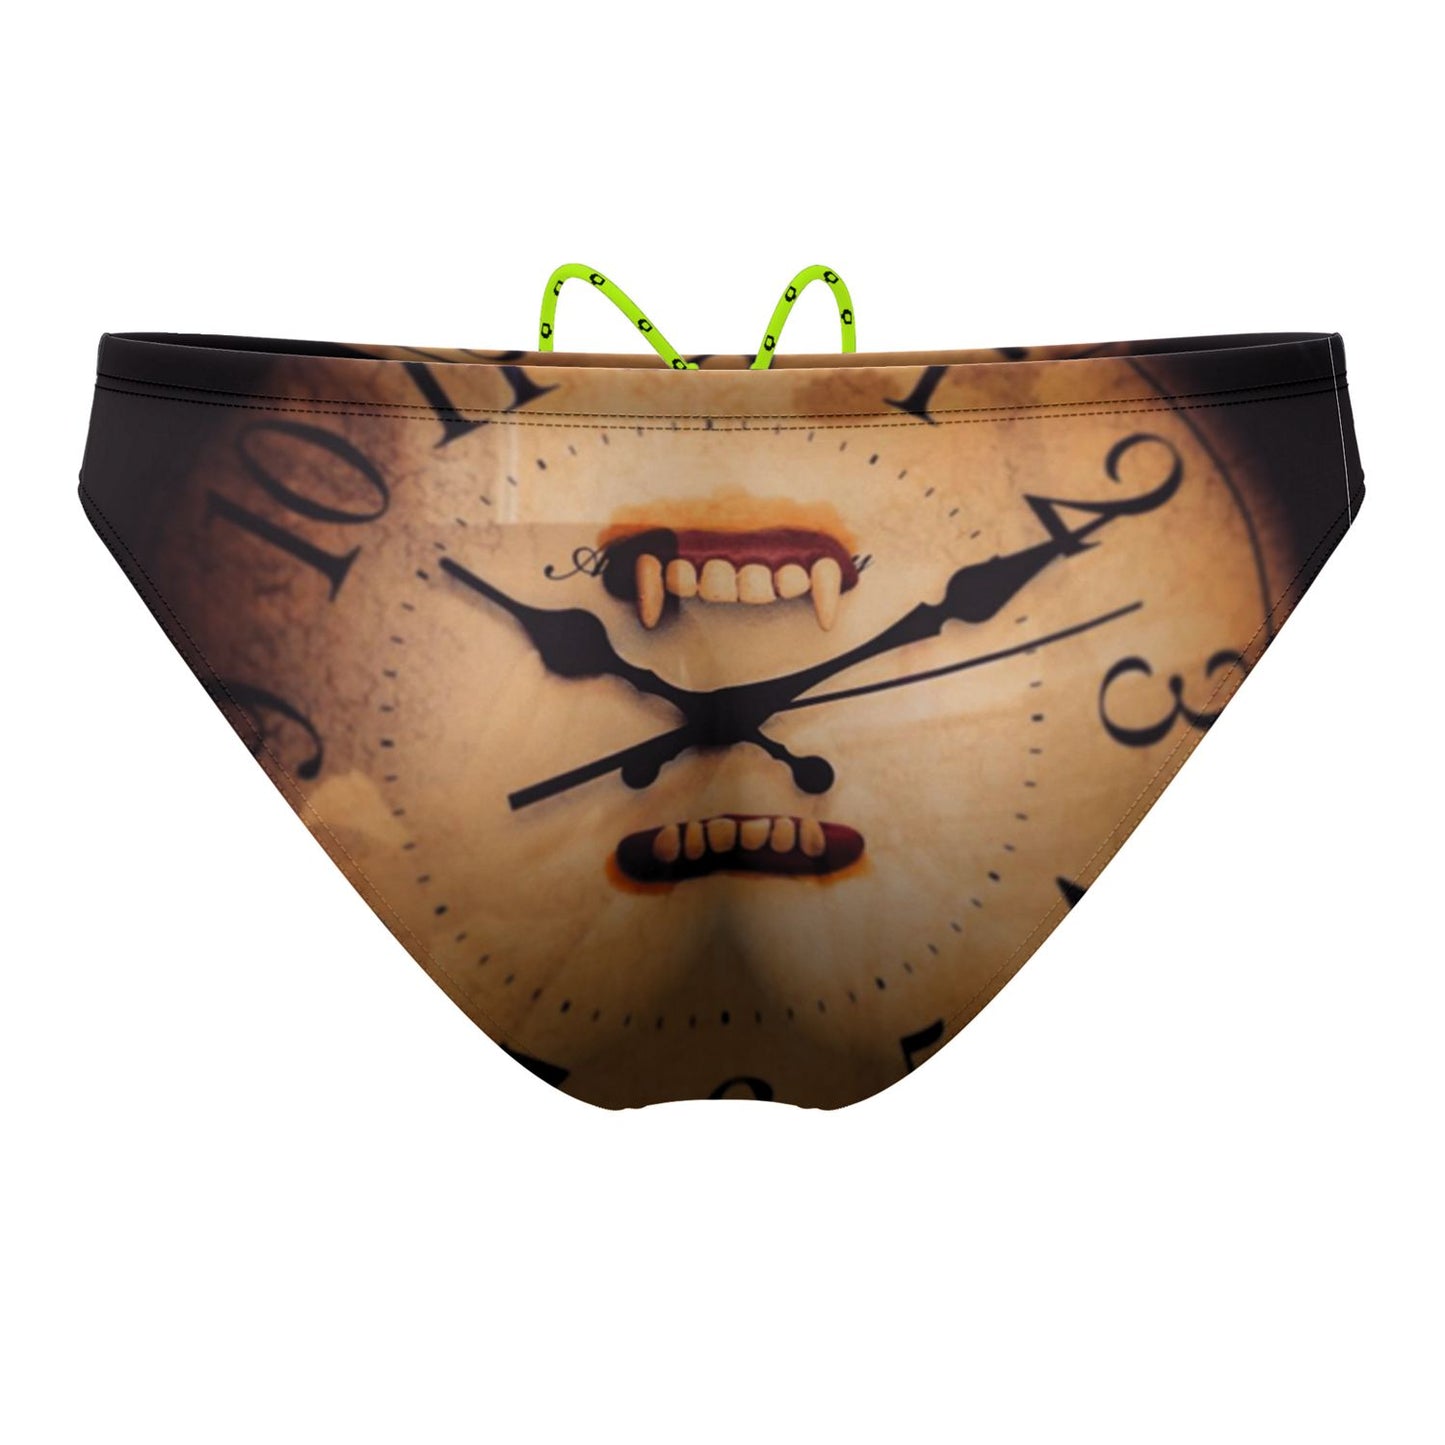 Time Eater Waterpolo Brief